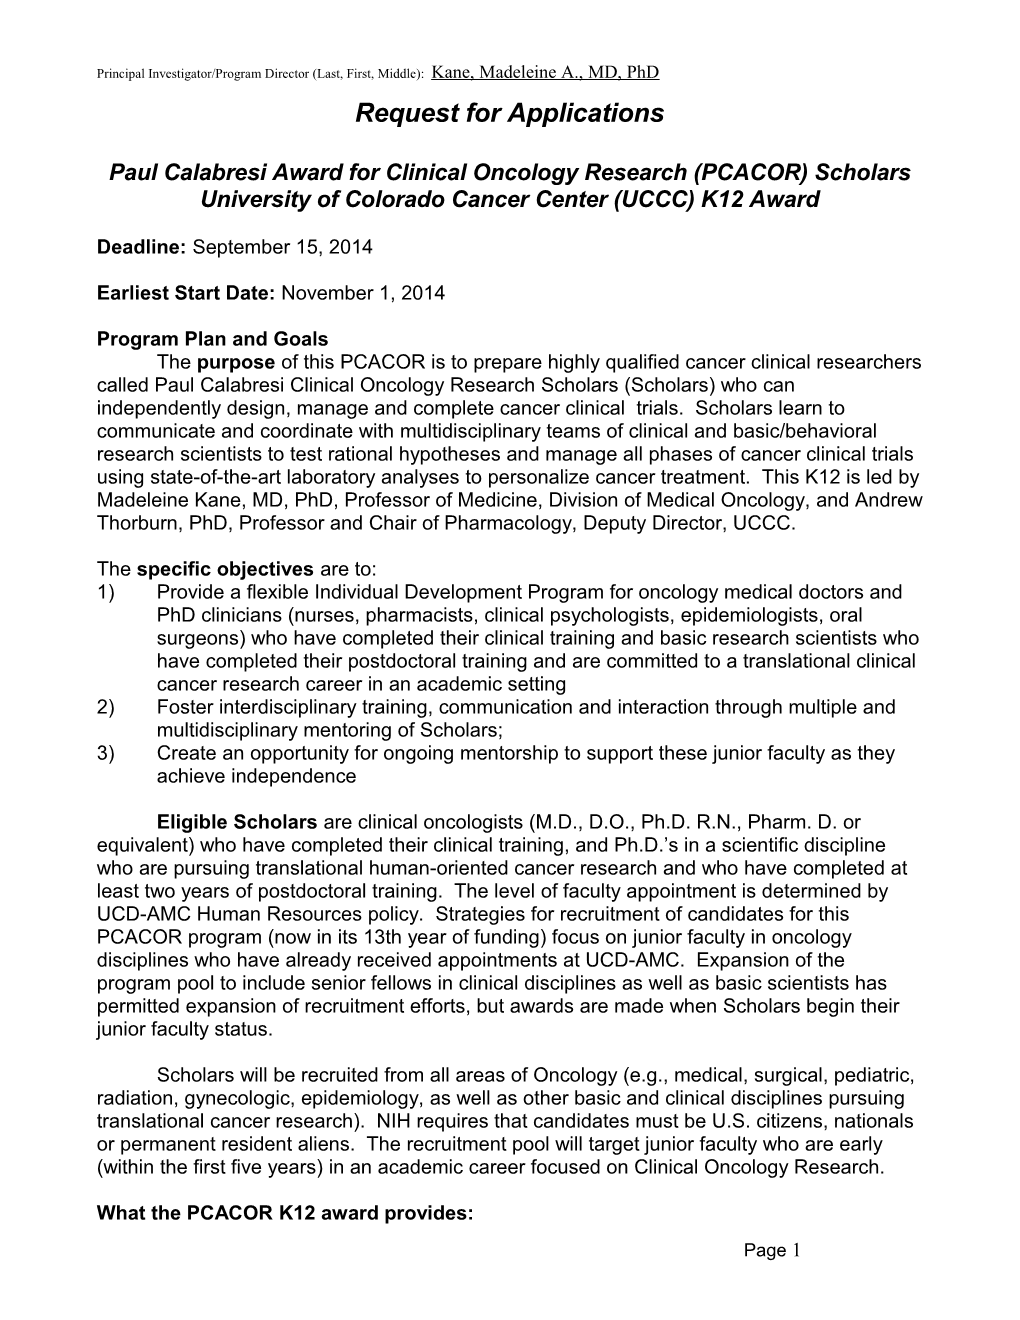 Request for Applications for Paul Calabresi Clinical Oncology Scholars (UCCC K12 Award)